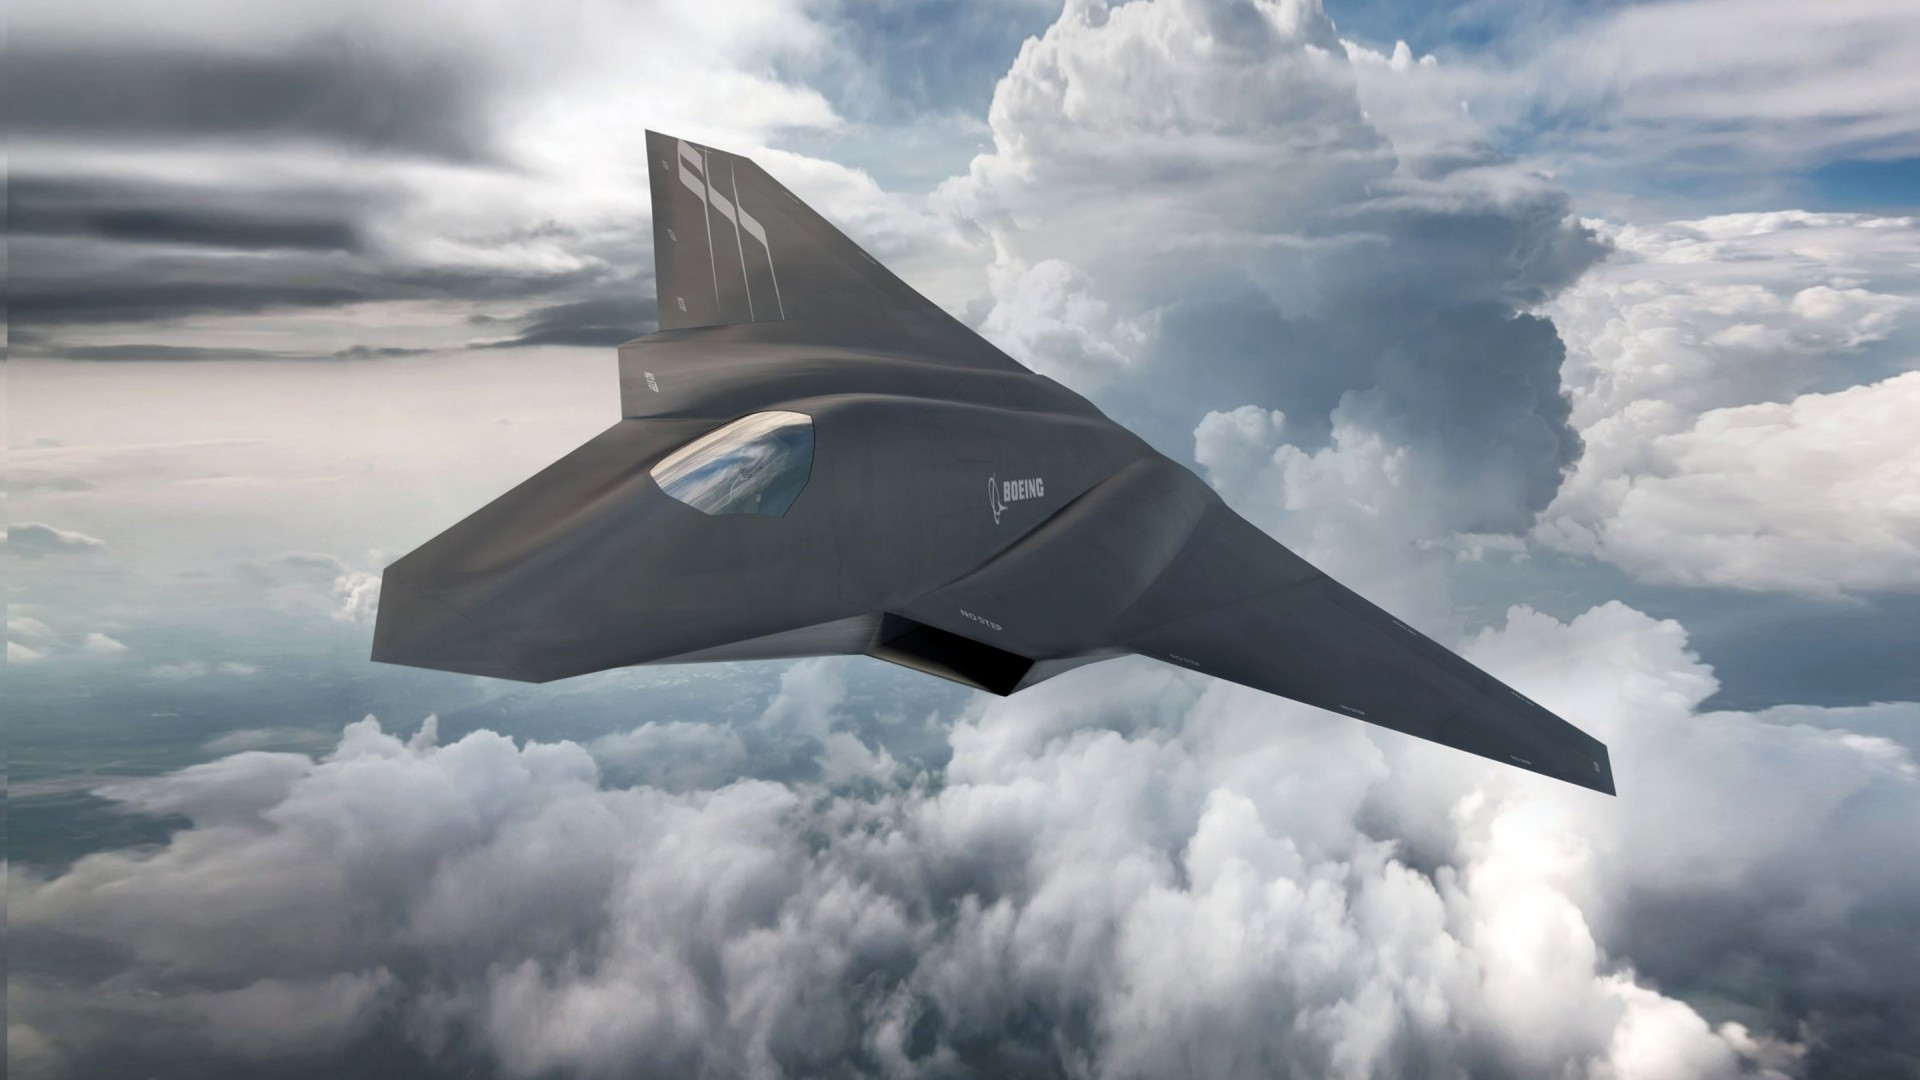 Download 1920x1080 Beoing, Aircraft Concept, Futuristic, Sky, Clouds Wallpaper for Widescreen